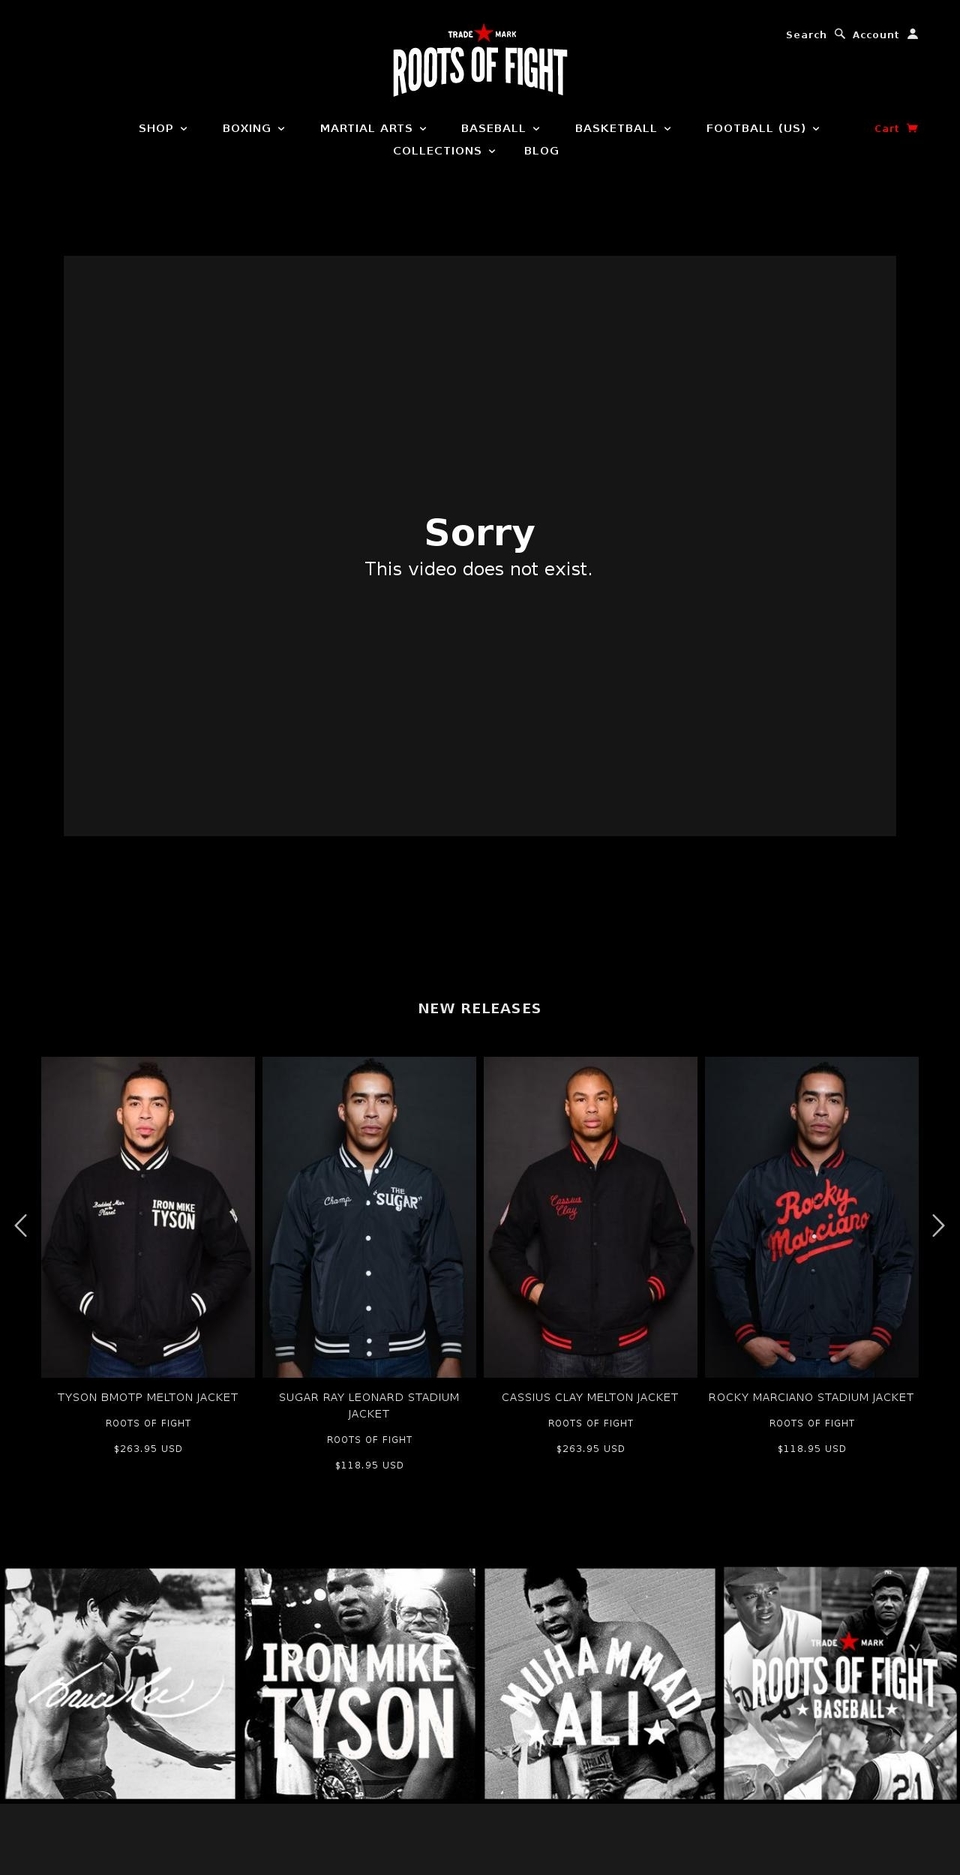 August Shopify theme site example rootsoffight.eu